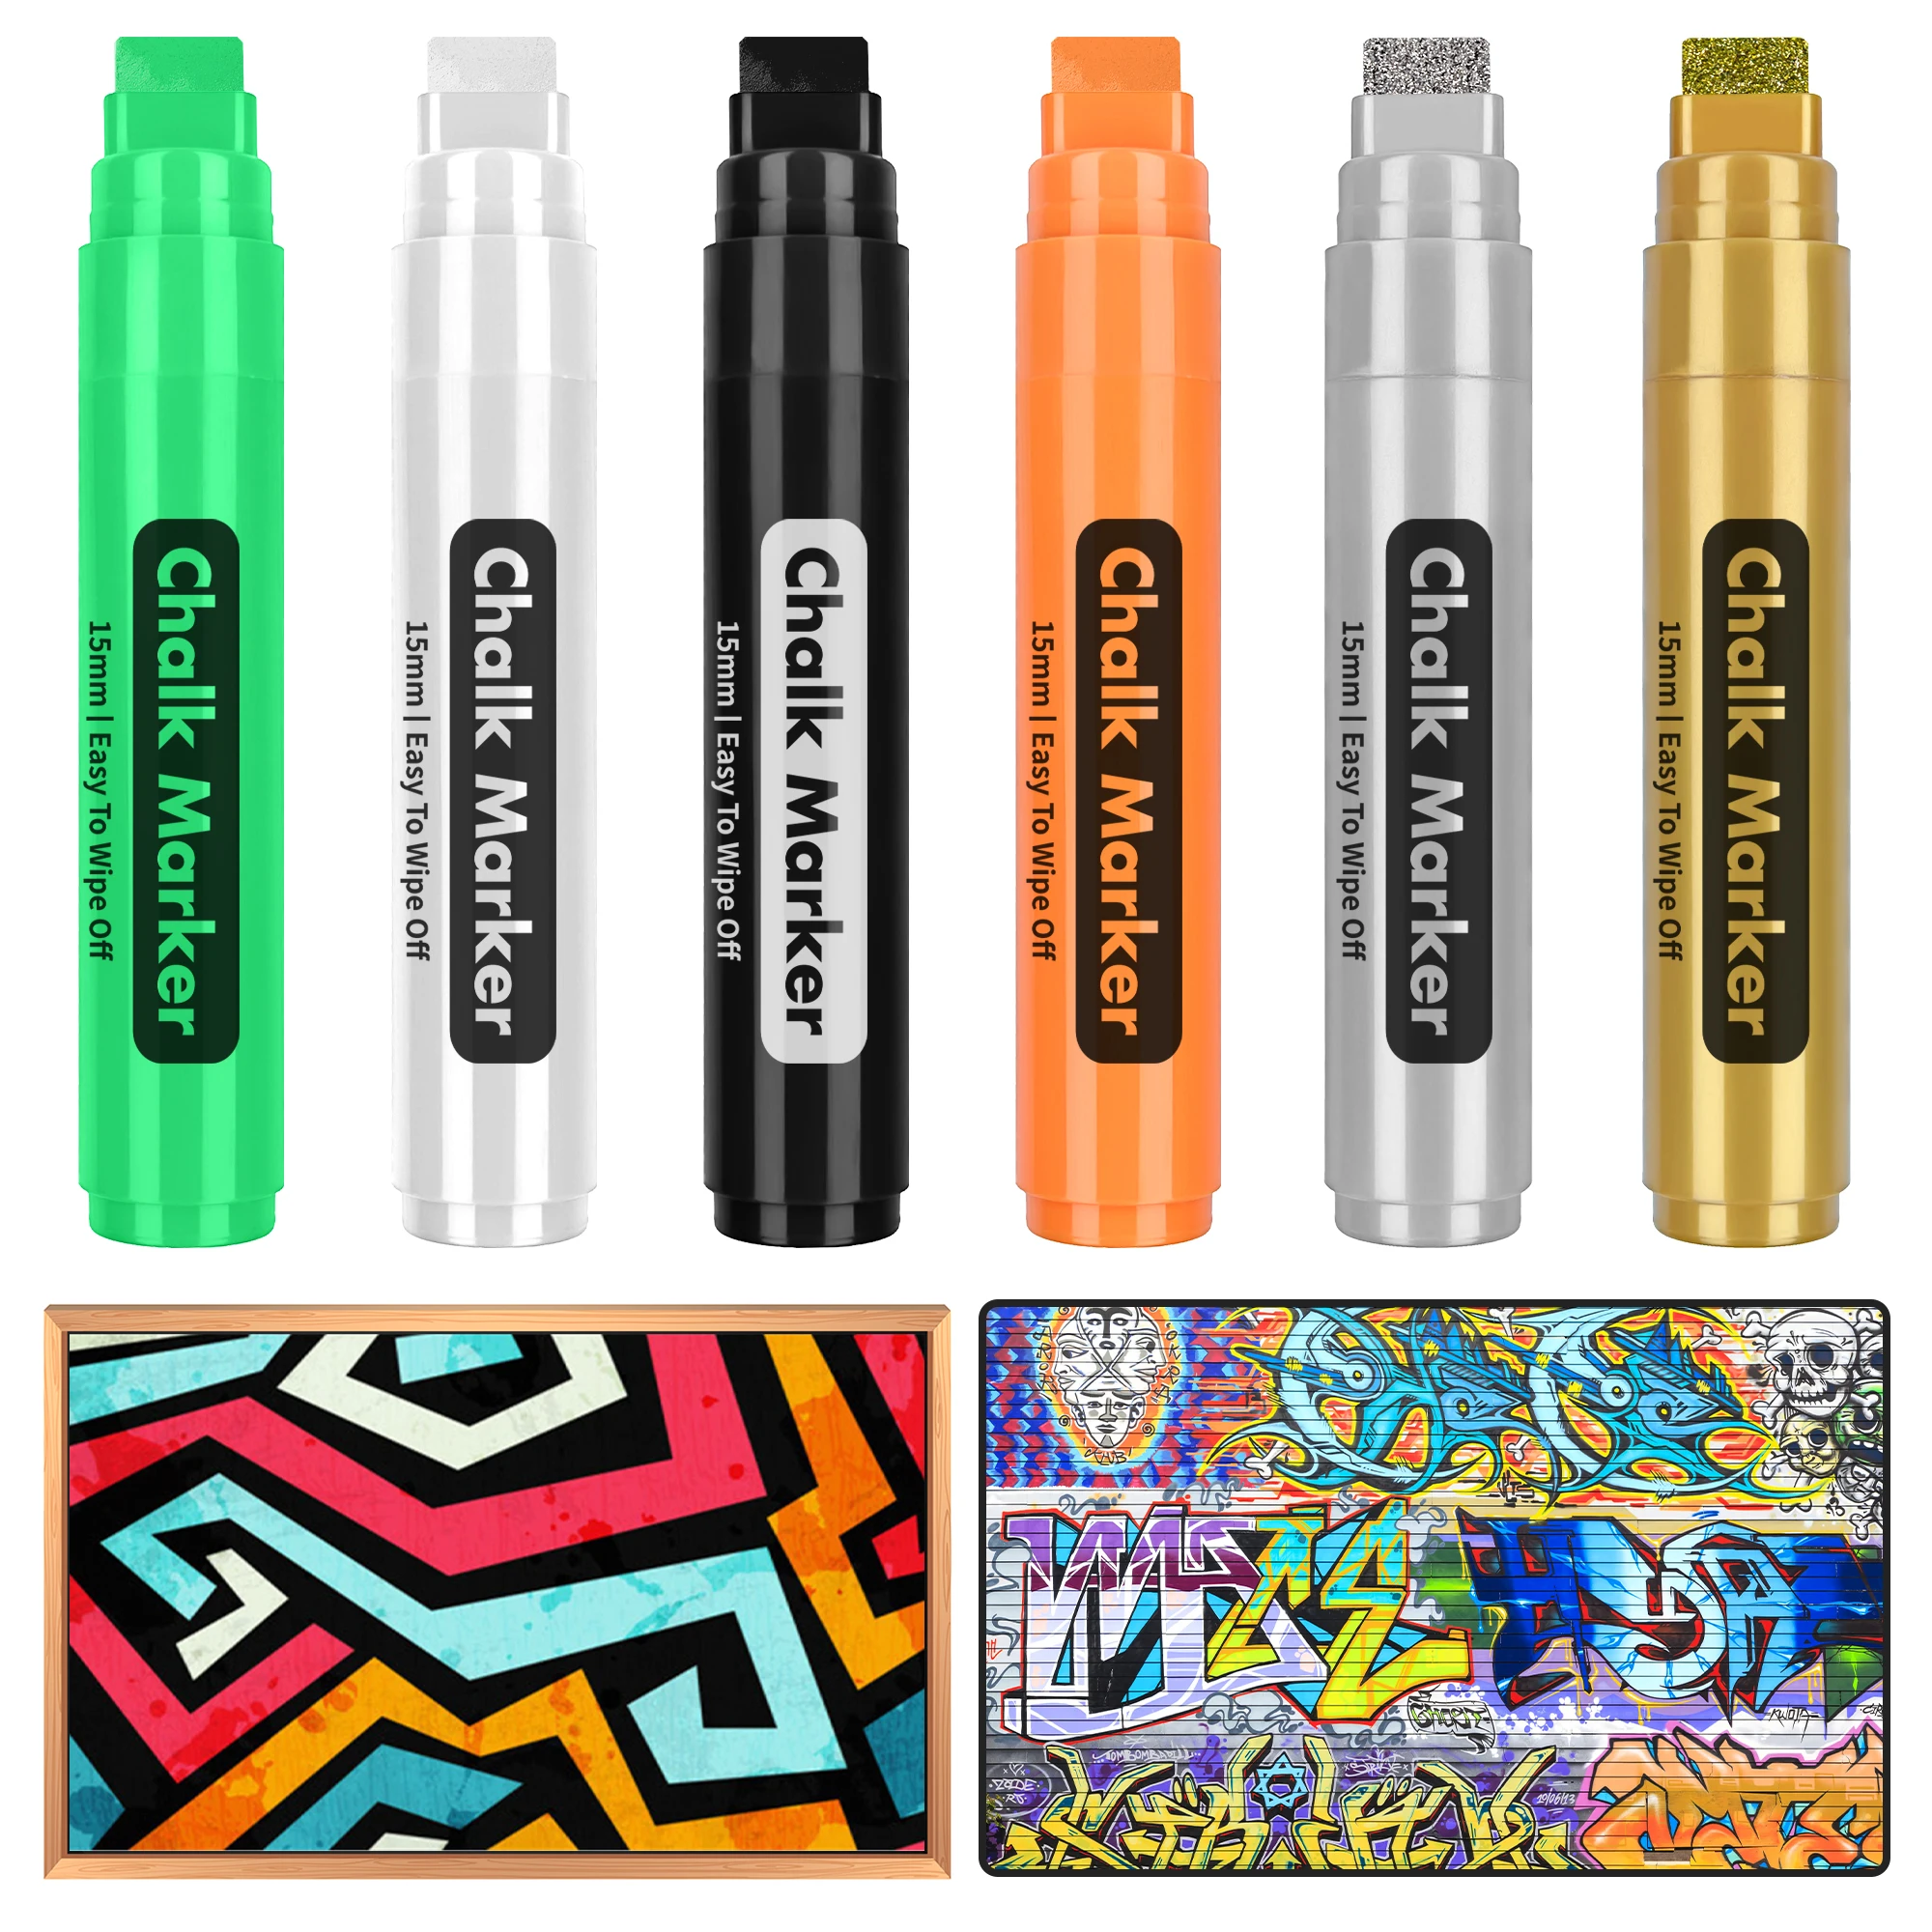 Acrylic Paint Markers, 15mm Felt Tip Jumbo Markers, 12 Pack Colored Graffiti Markers, Permanent Paint Pens for Tagging, Signs, D